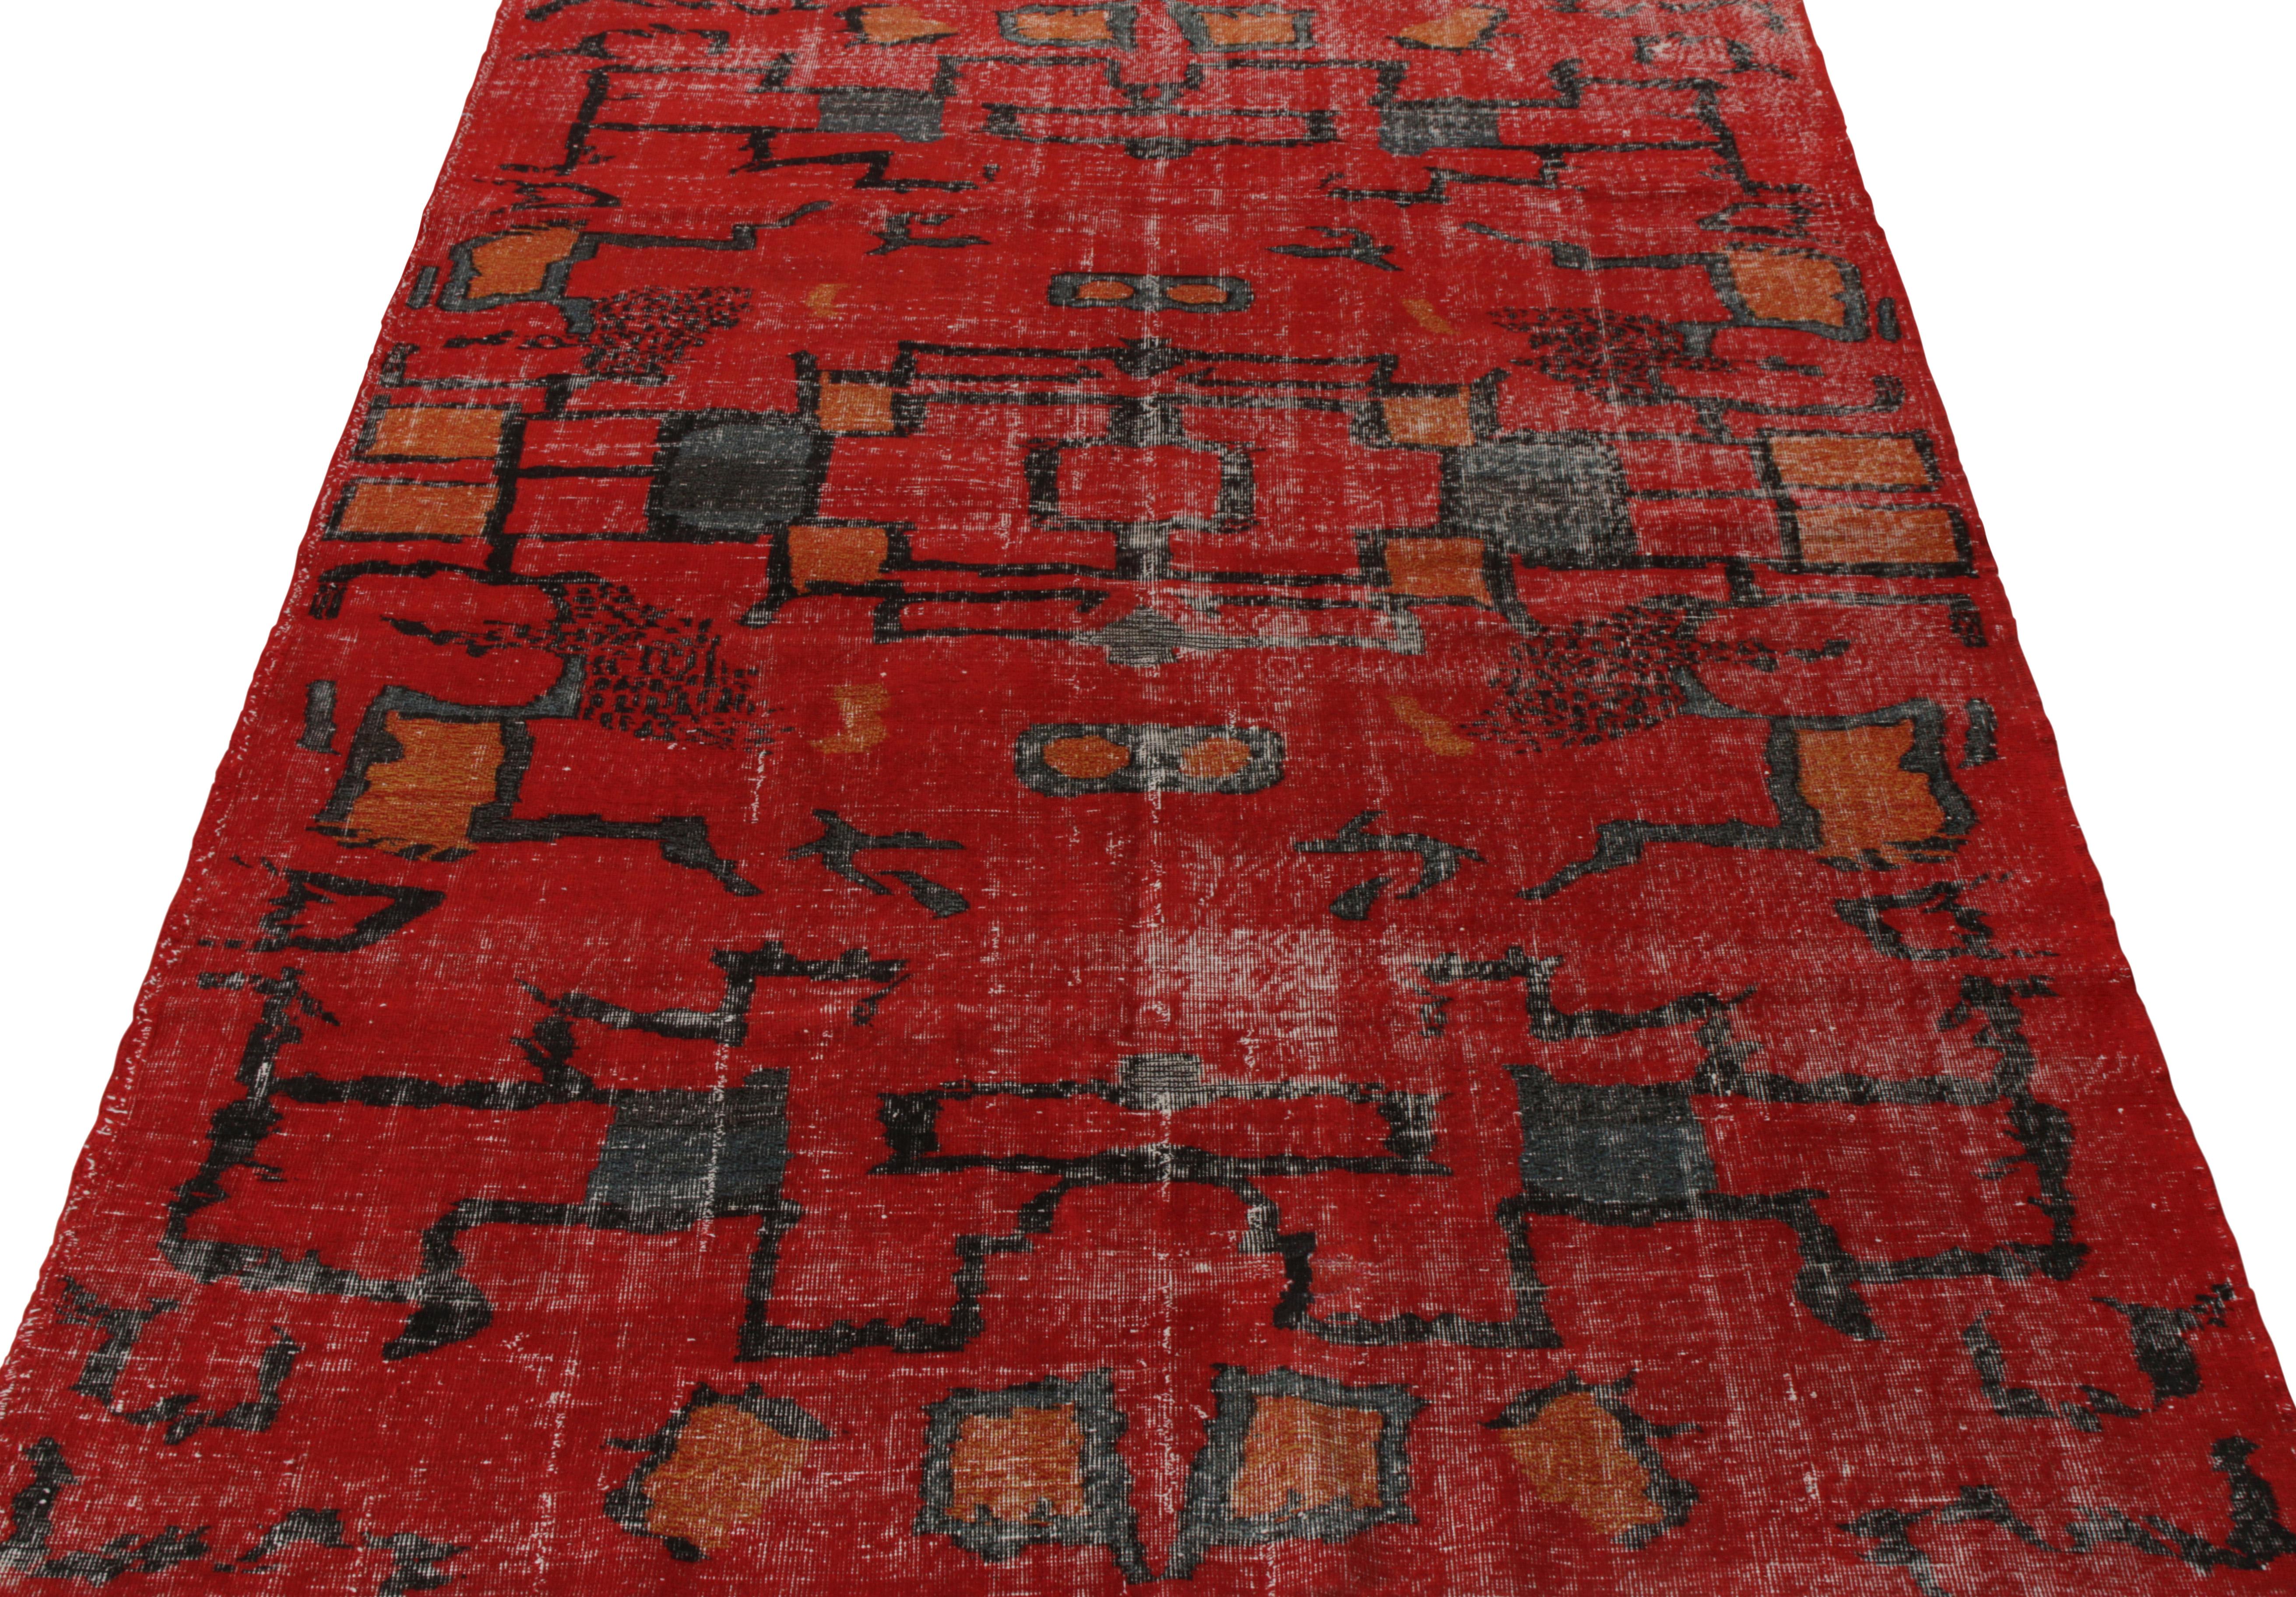 A beautiful 7 x 9 Art Deco vintage rug from Rug & Kilim’s growing Mid-Century Pasha Collection. Originating from Turkey circa 1960-1970 among the celebrated mid-century modern rugs of Turkish icon Zeki Müren. 

This cherished collectible is